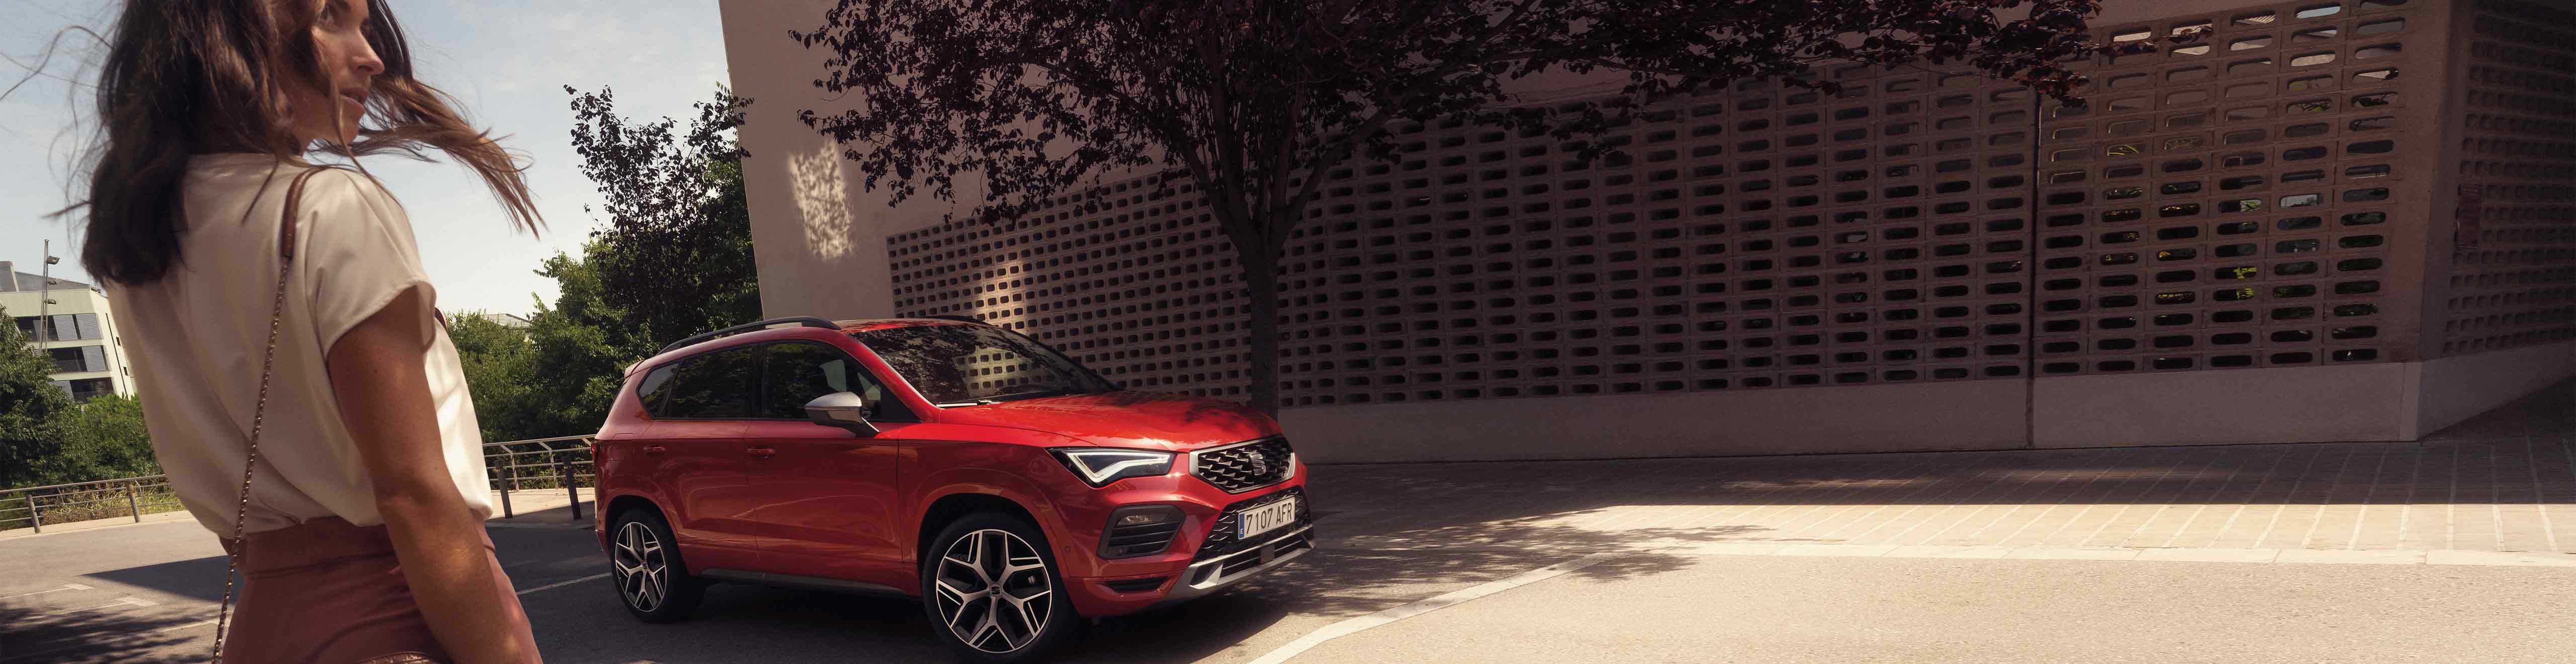 Woman walking to the new SEAT Ateca velvet red colour